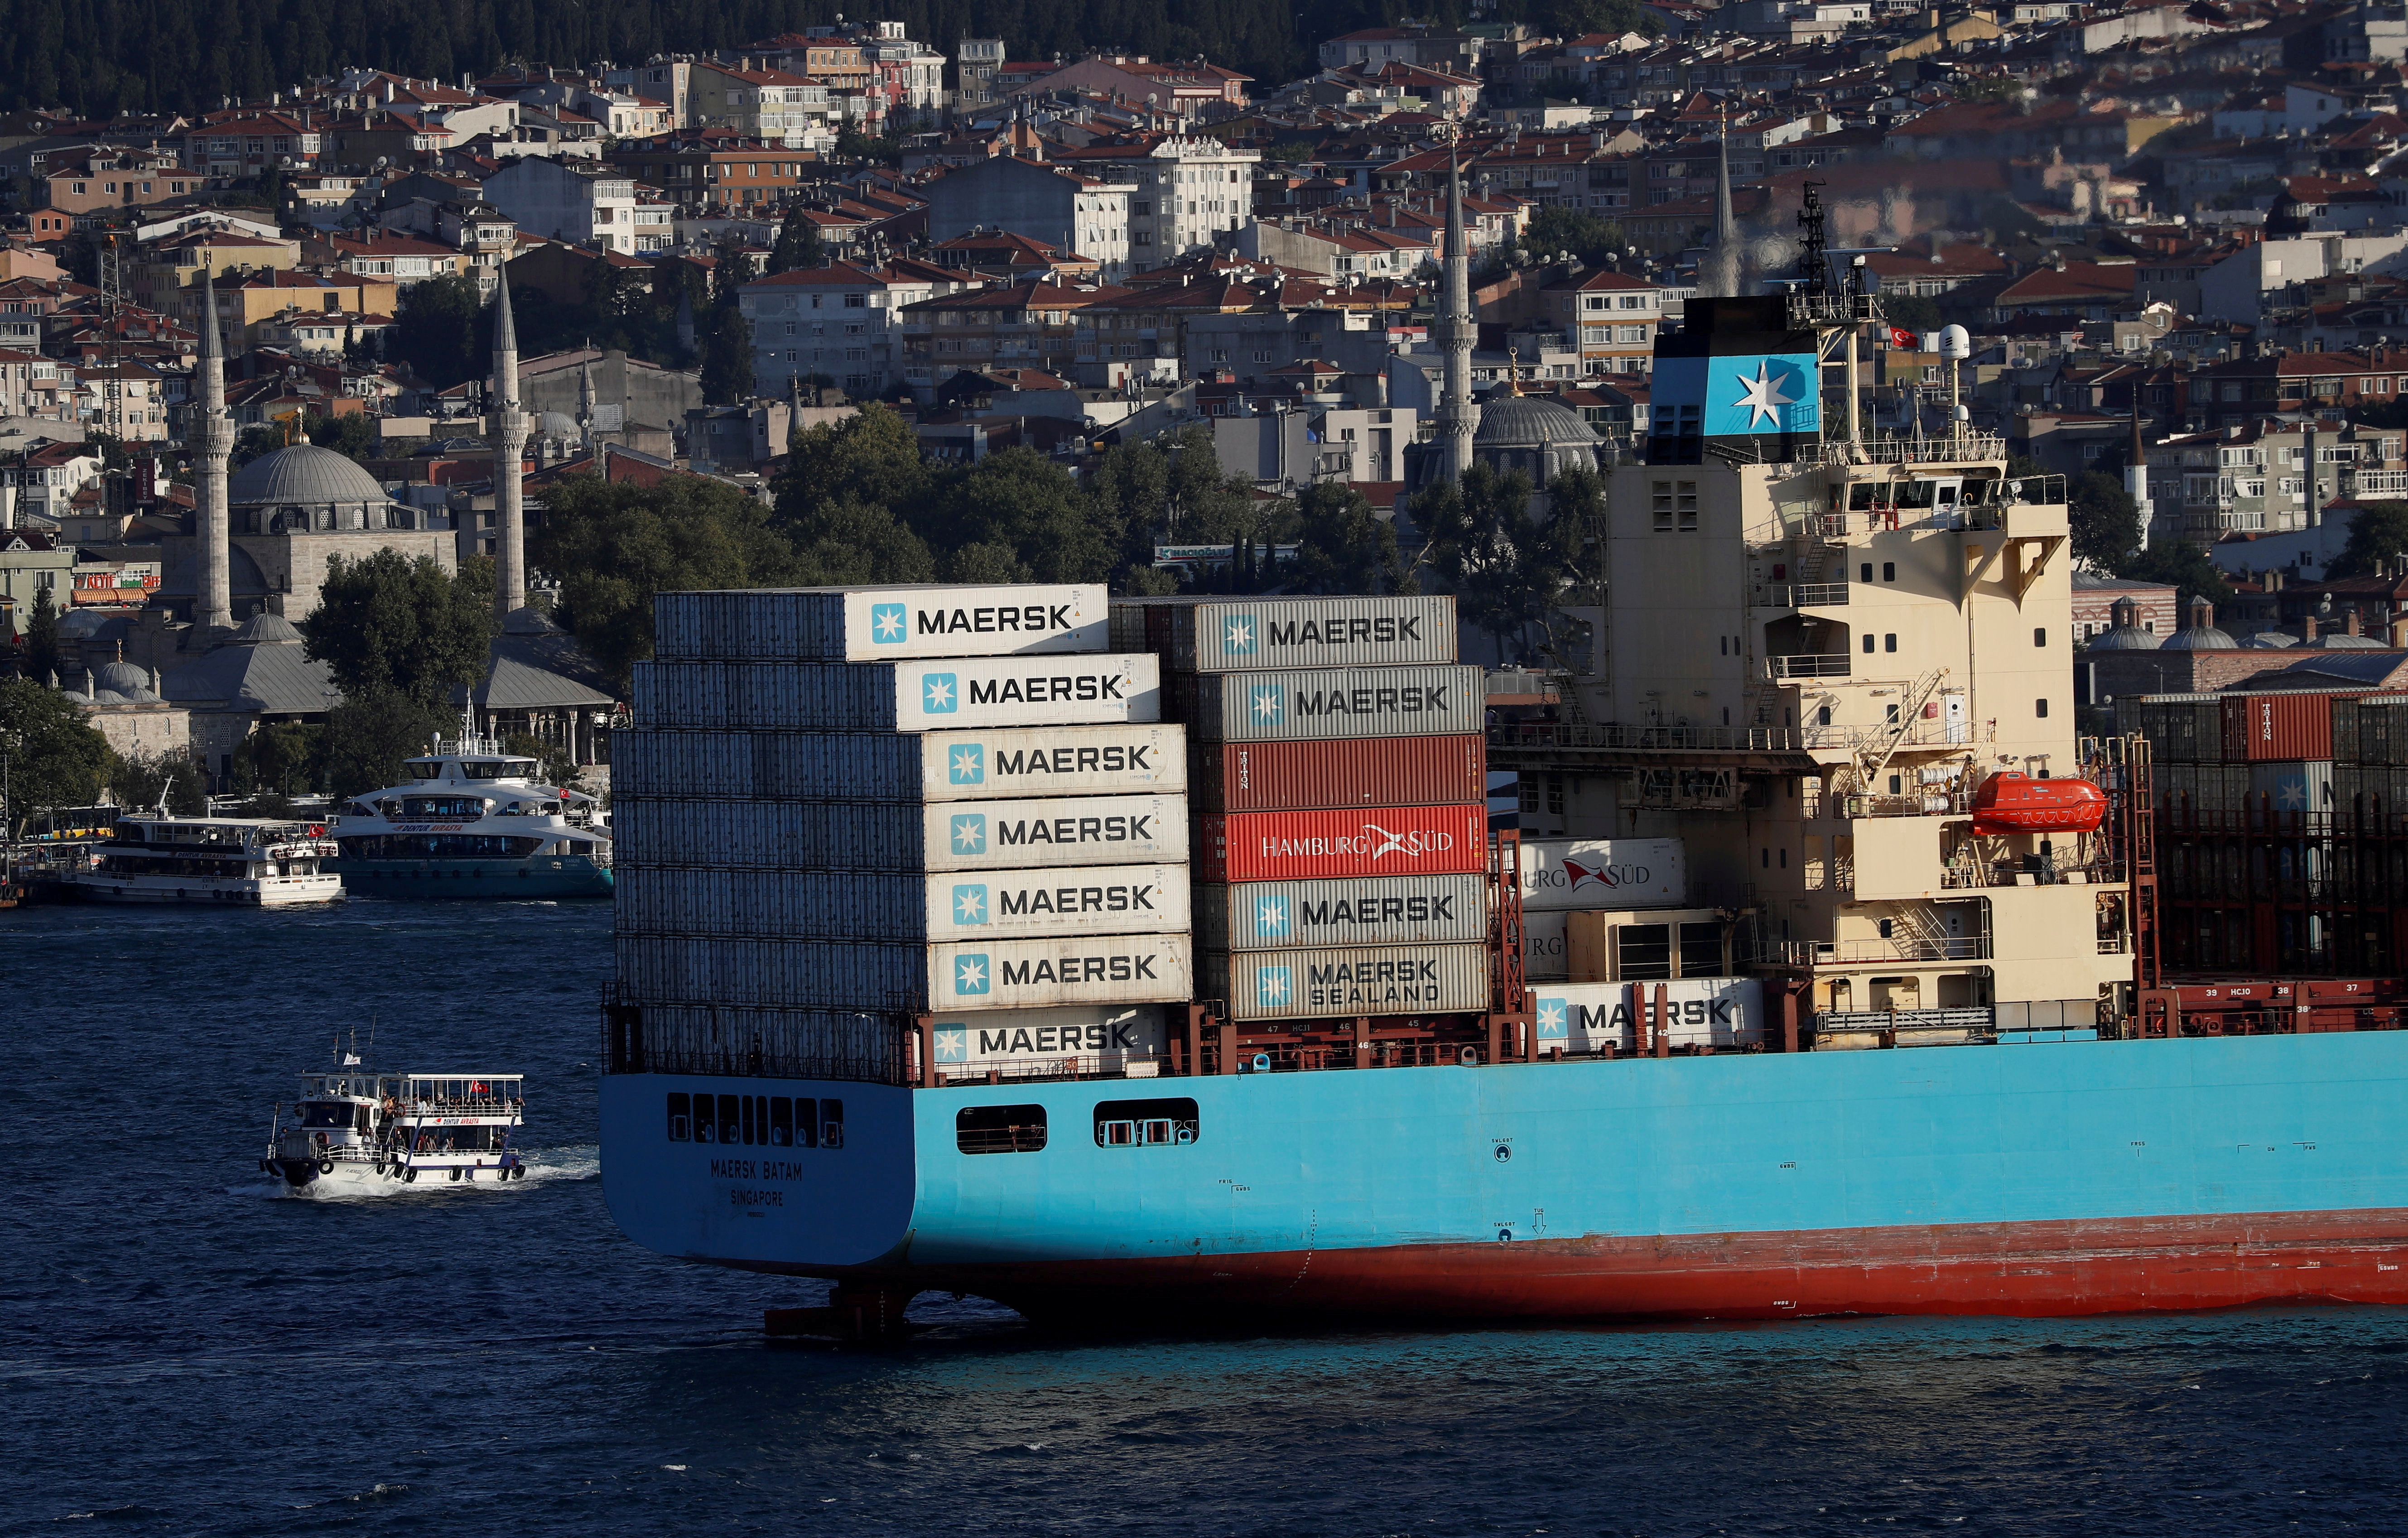 The Maersk Line container ship Maersk Batam sails in the Bosphorus, on its way to the Mediterranean Sea, in Istanbul, Turkey